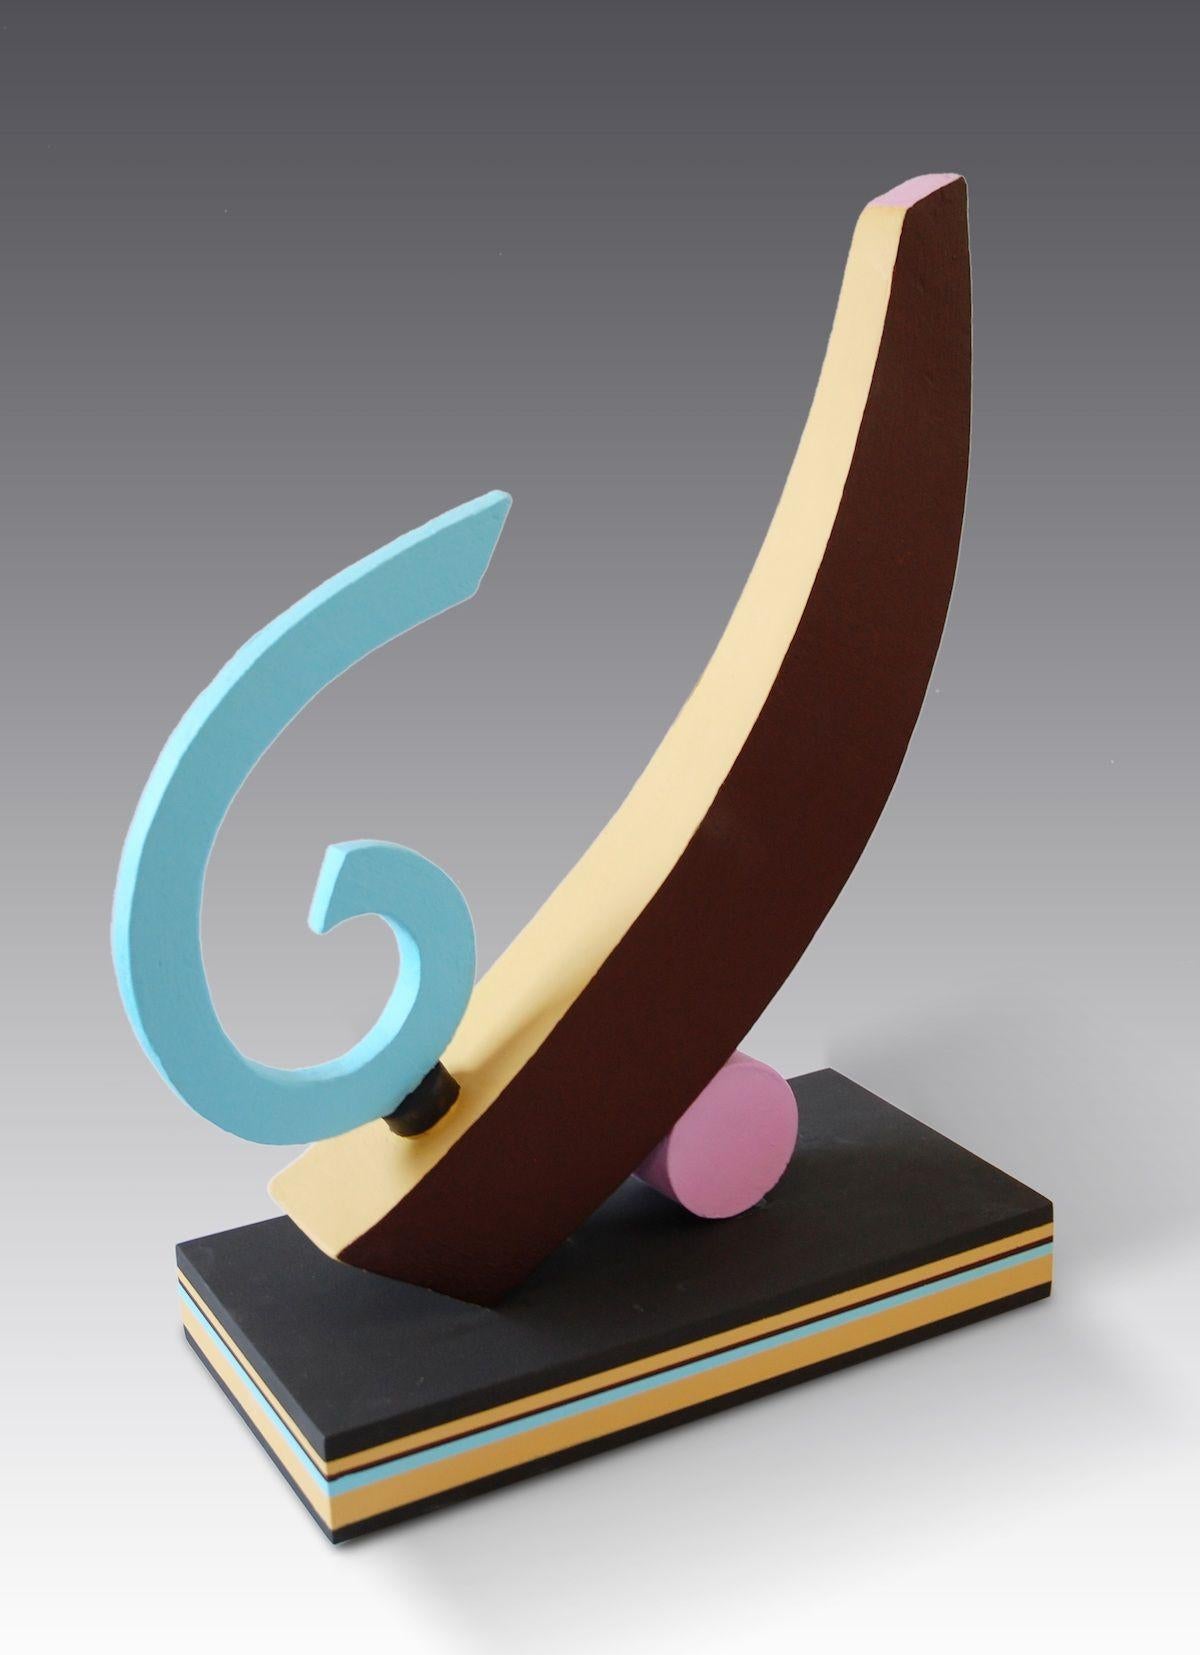 Sisyphus is a unique fired clay constructed, painted and mounted on MDF sculpture by contemporary artist Patricia Volk, dimensions are 42 × 35 × 15 cm (16.5 × 13.8 × 5.9 in). 
The sculpture is signed and comes with a certificate of authenticity.